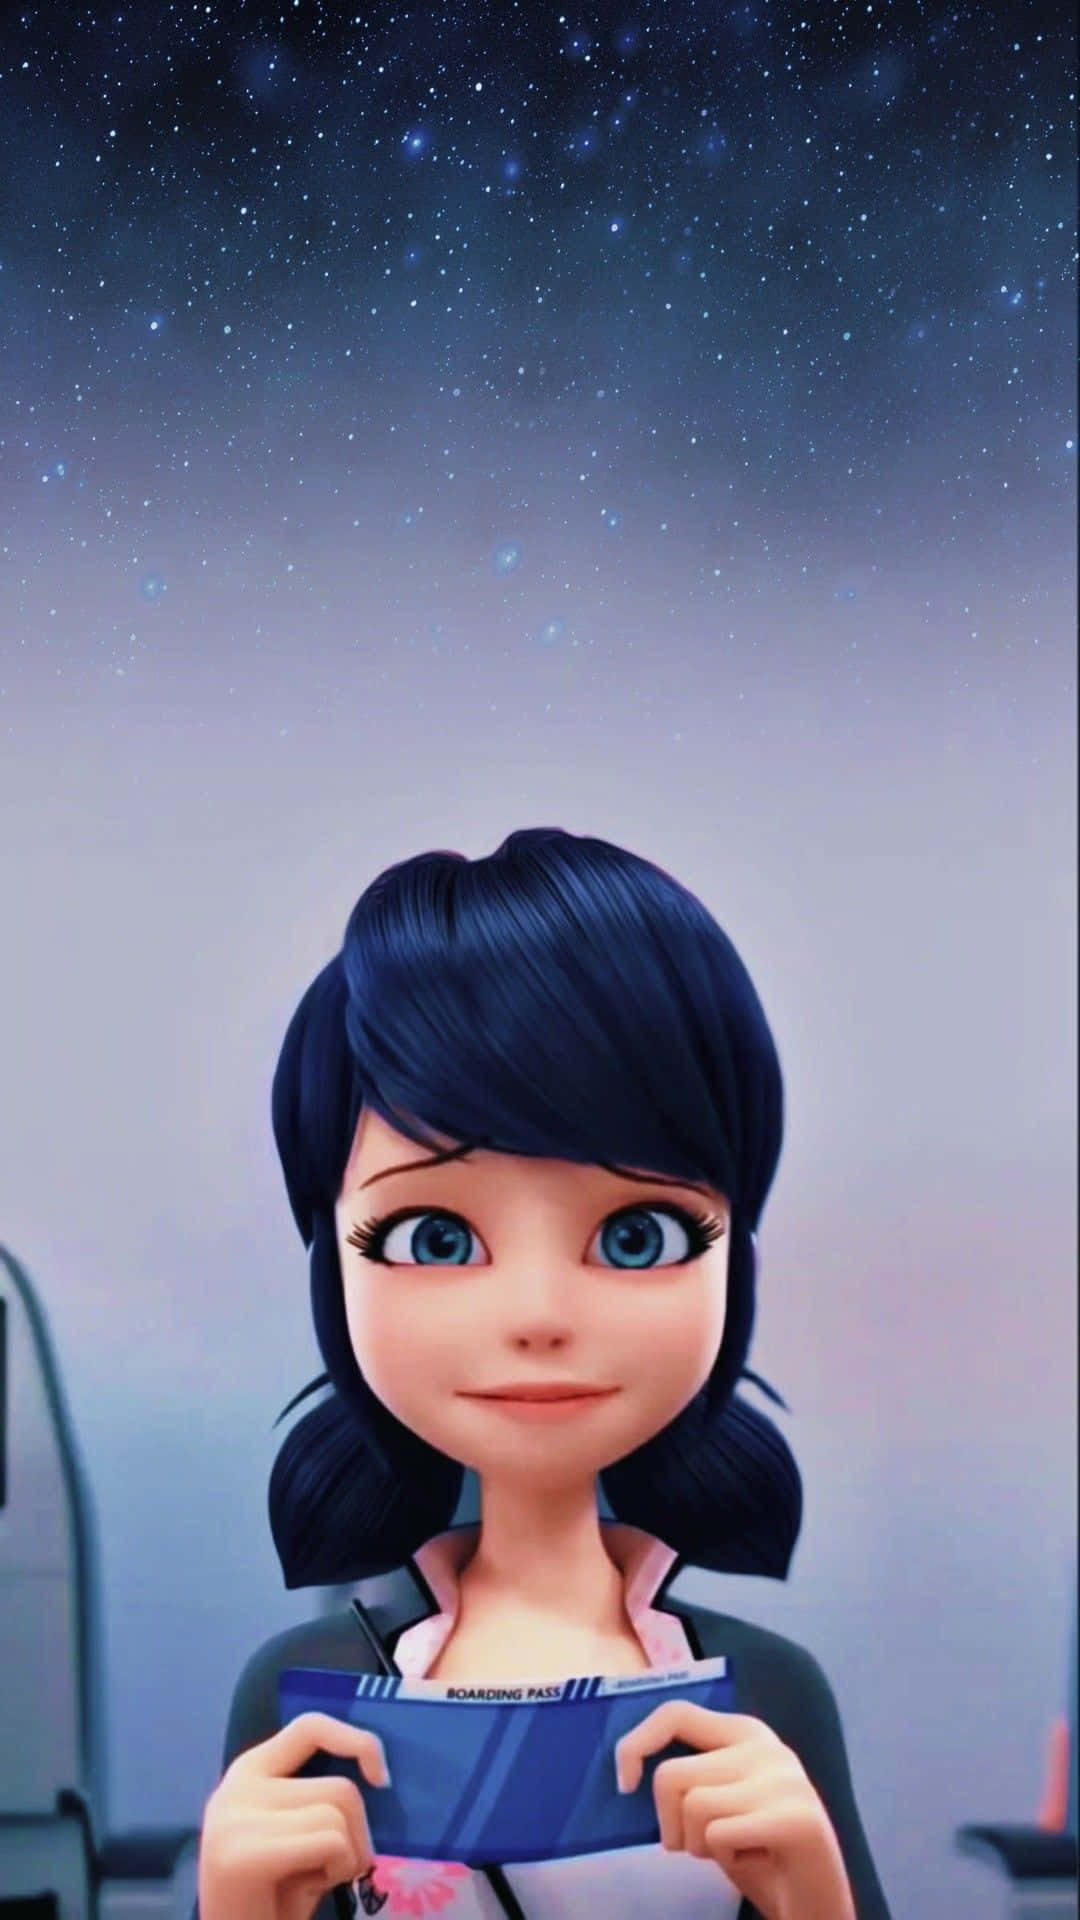 Captivating Marinette Smiling in the Moonlight